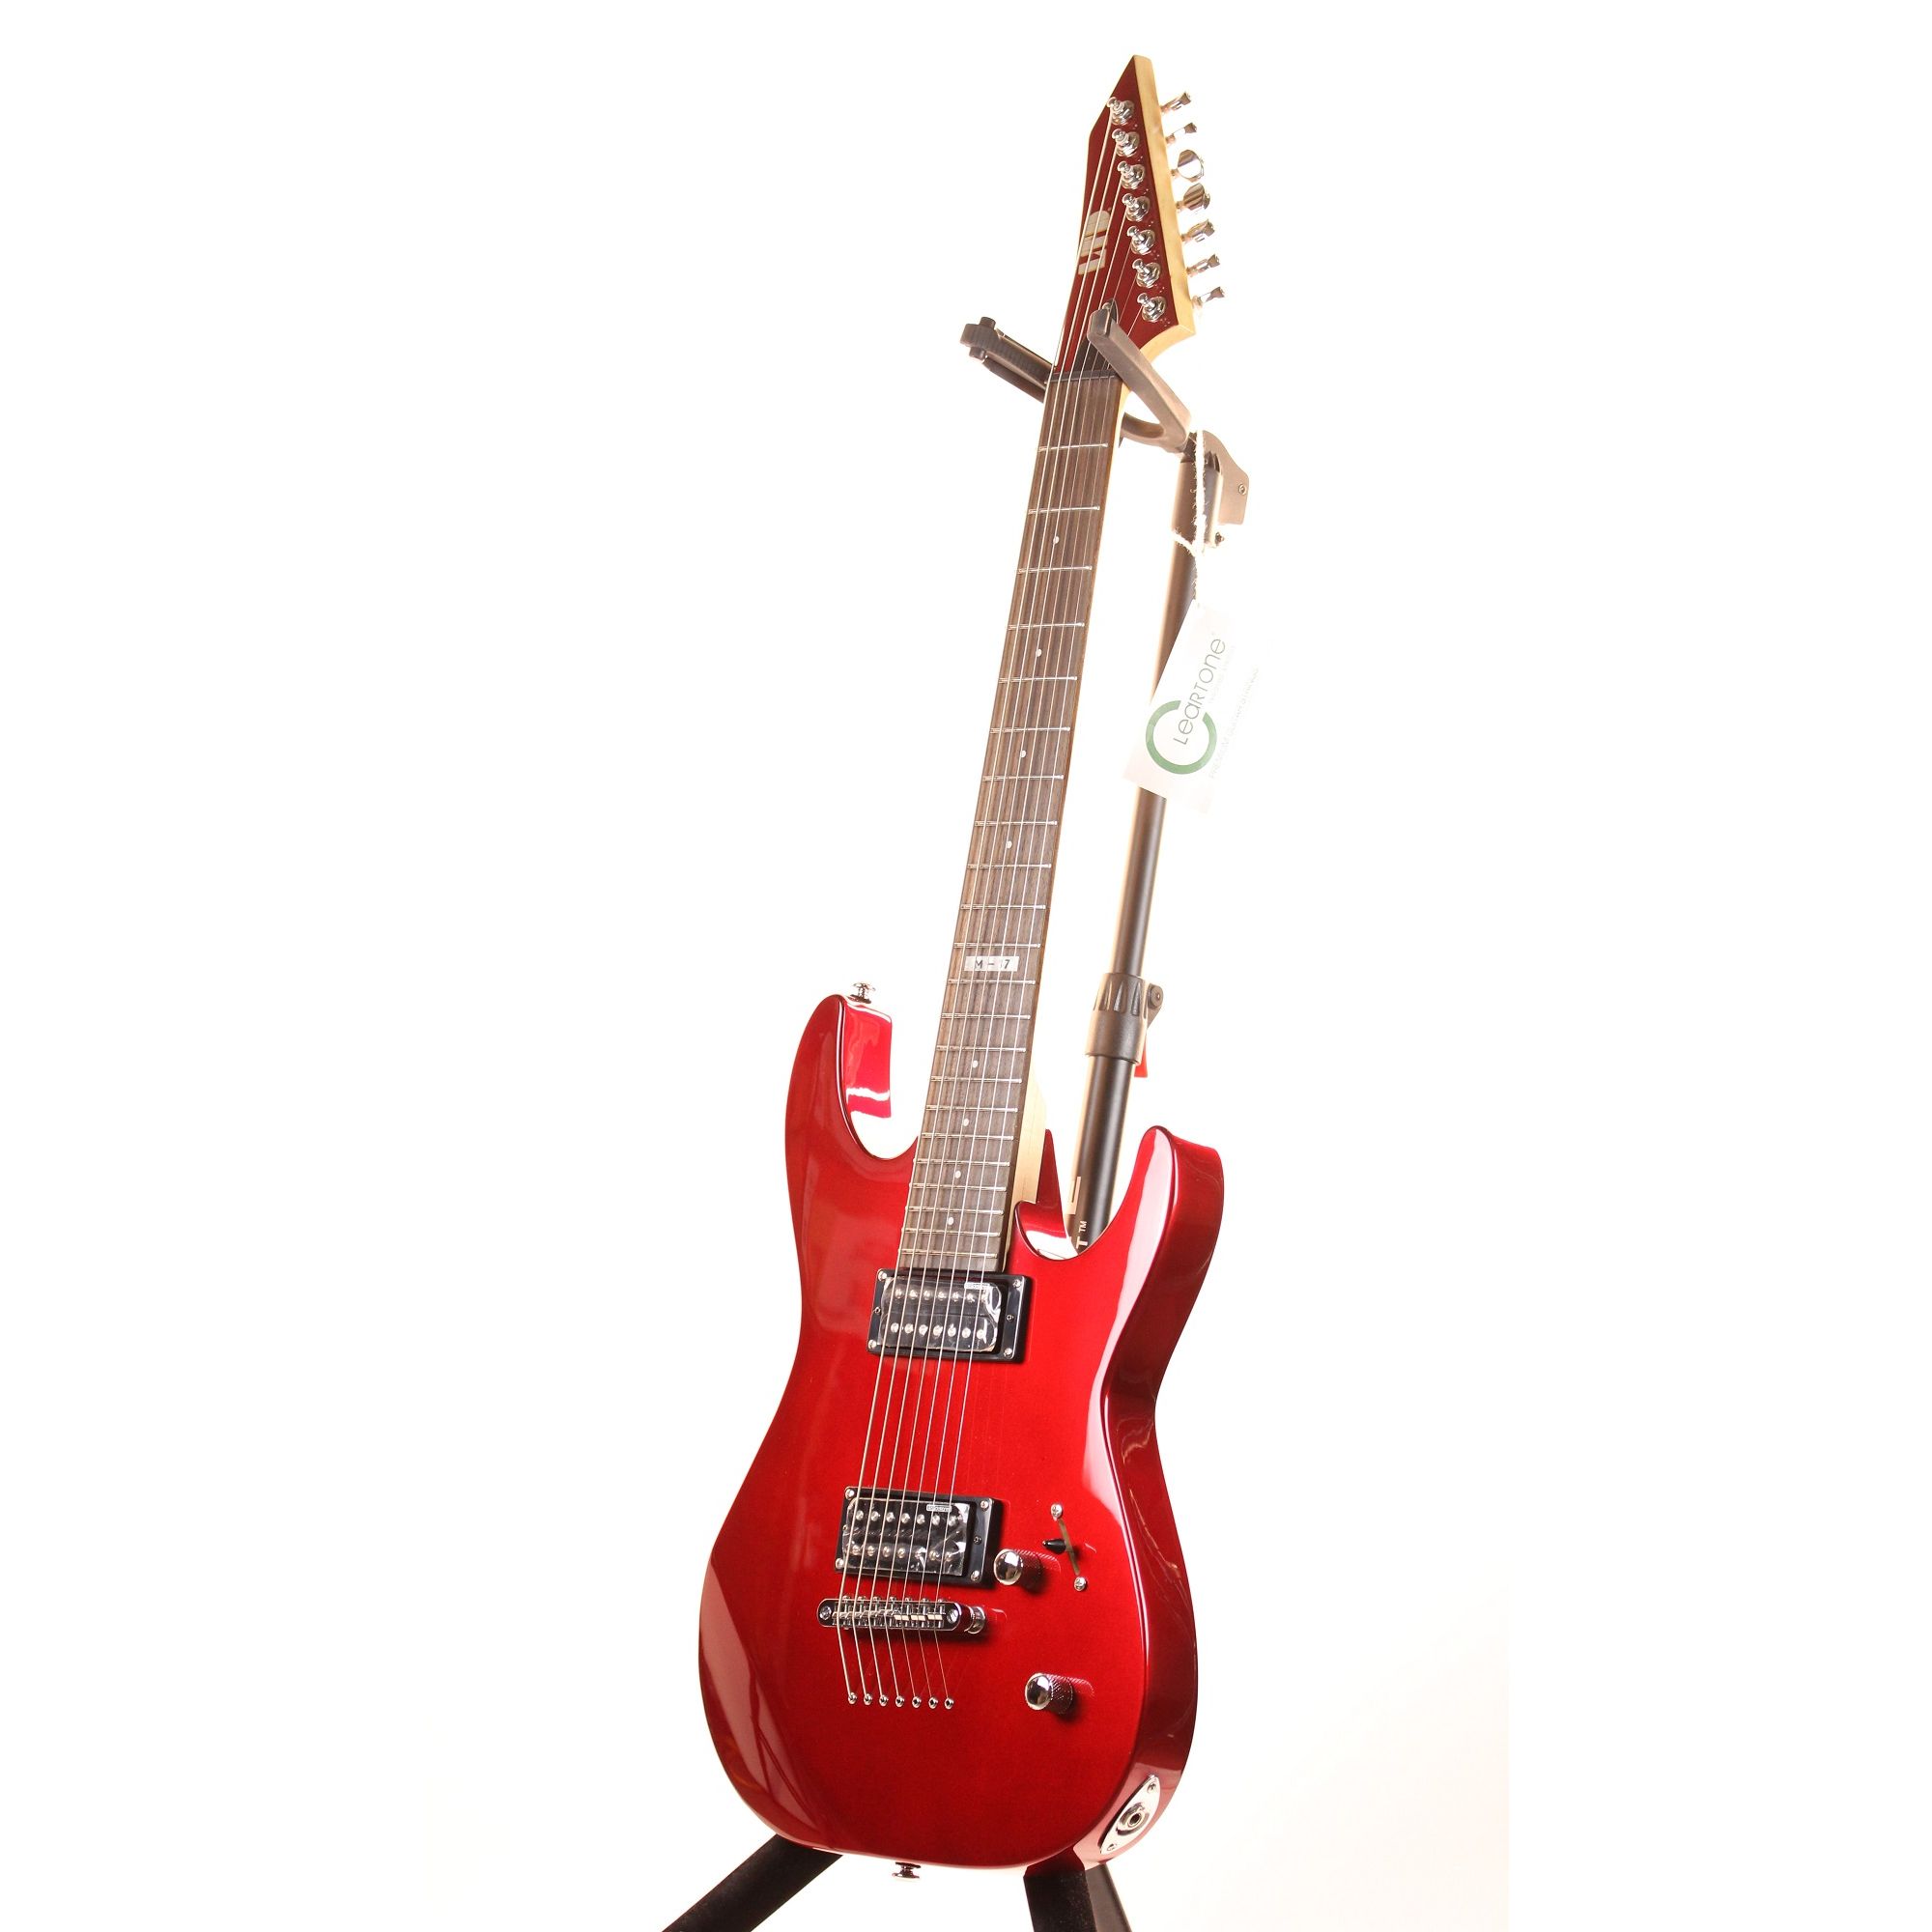 ESP LTD M-17 Candy Apple Red Limited Edition 7 String Electric Guitar